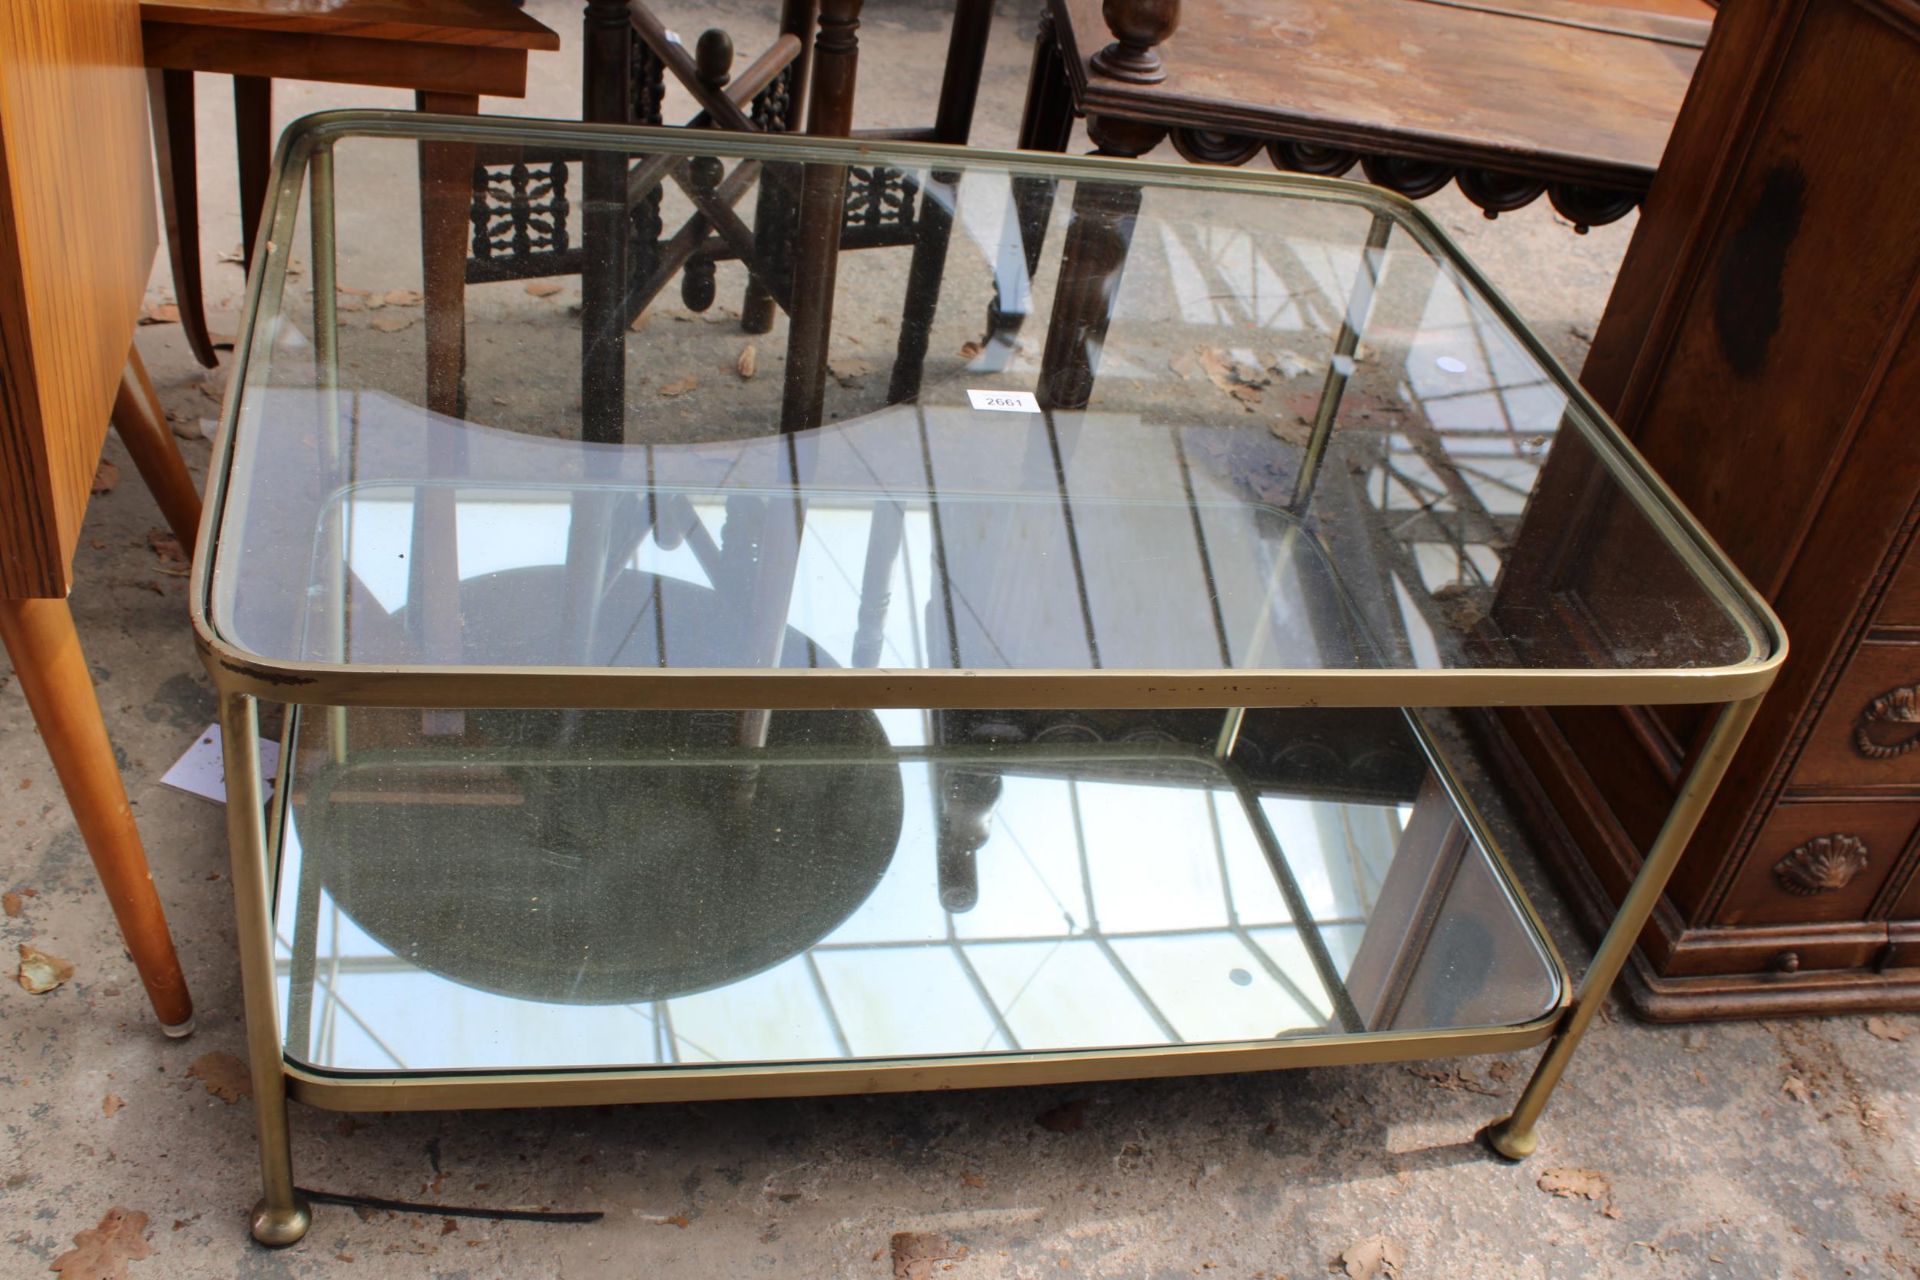 A MODERN METAL FRAMED COFFEE TABLE WITH MIRRORED BASE SHELF AND GLASS TOP SHELF, 31" X 23"